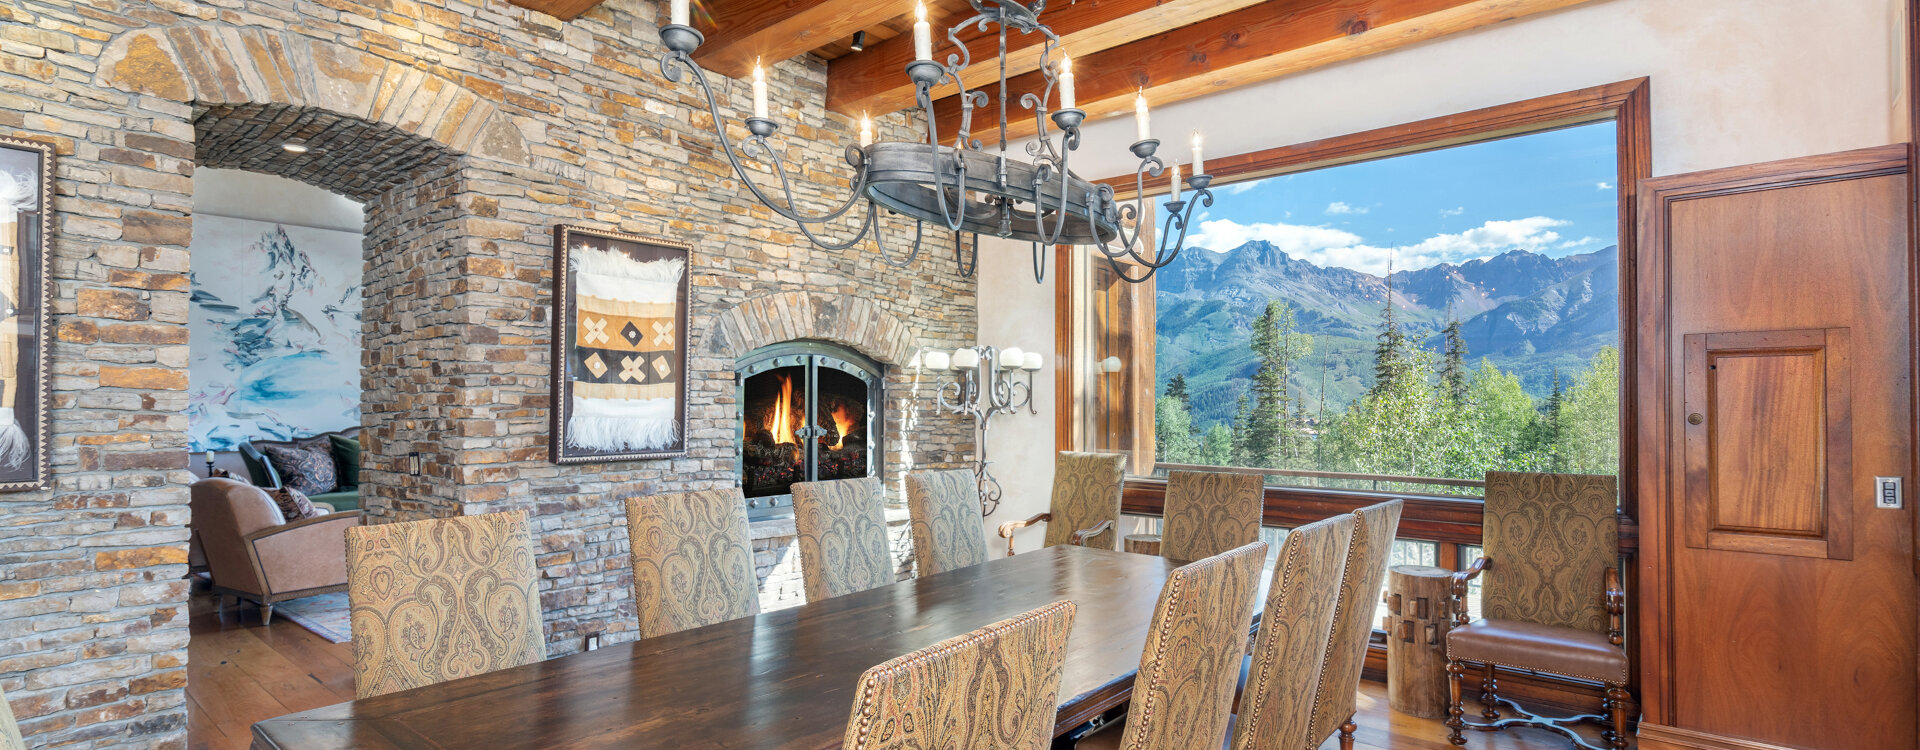 3.02-telluride-picture-perfect-dining-room-view